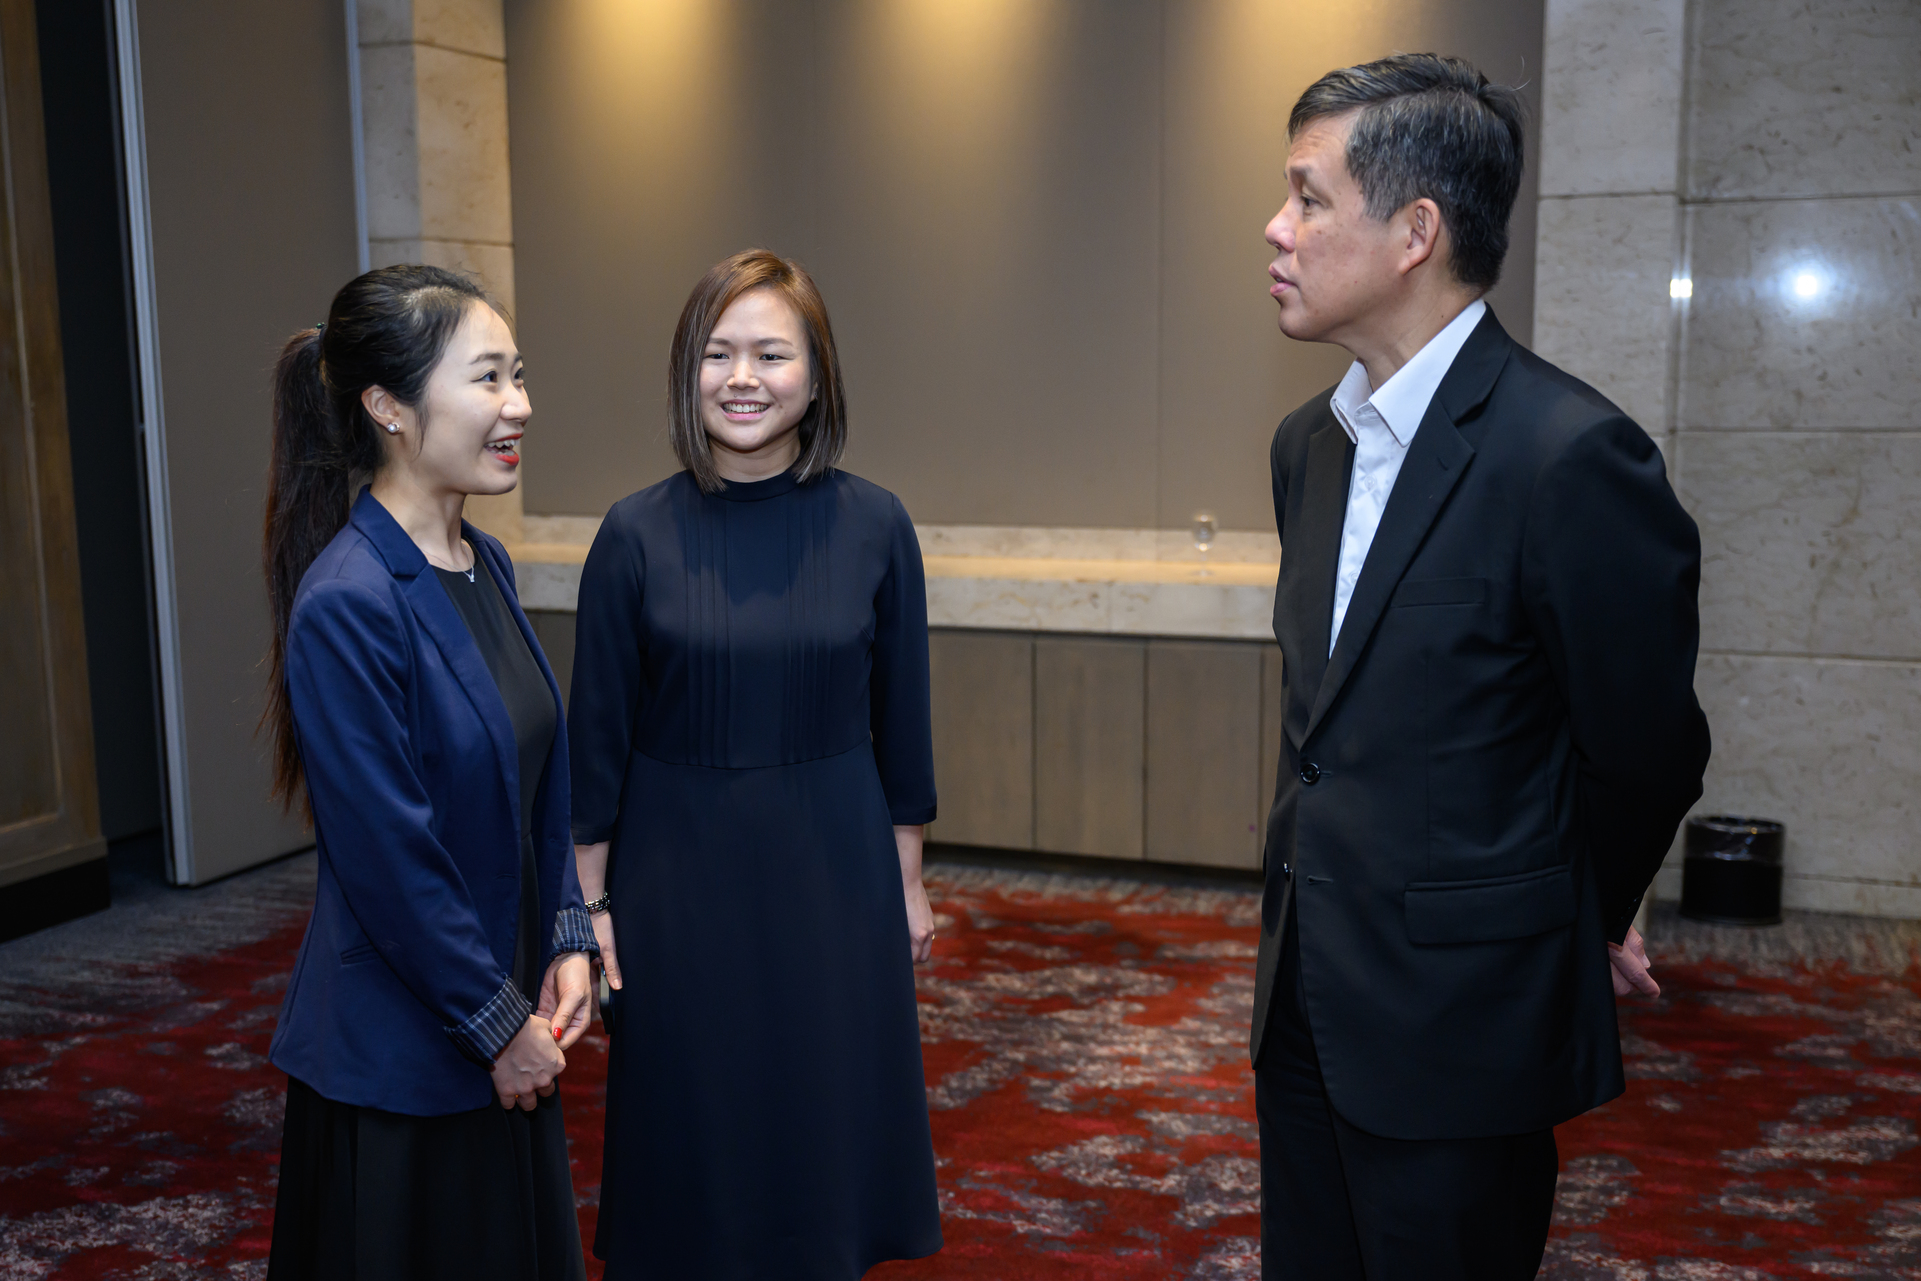 Violas Xiao, XTransfer Local CEO of Singapore (left) had a friendly conversation with the Singapore Minister of Education, Chan Chun Sing (right).